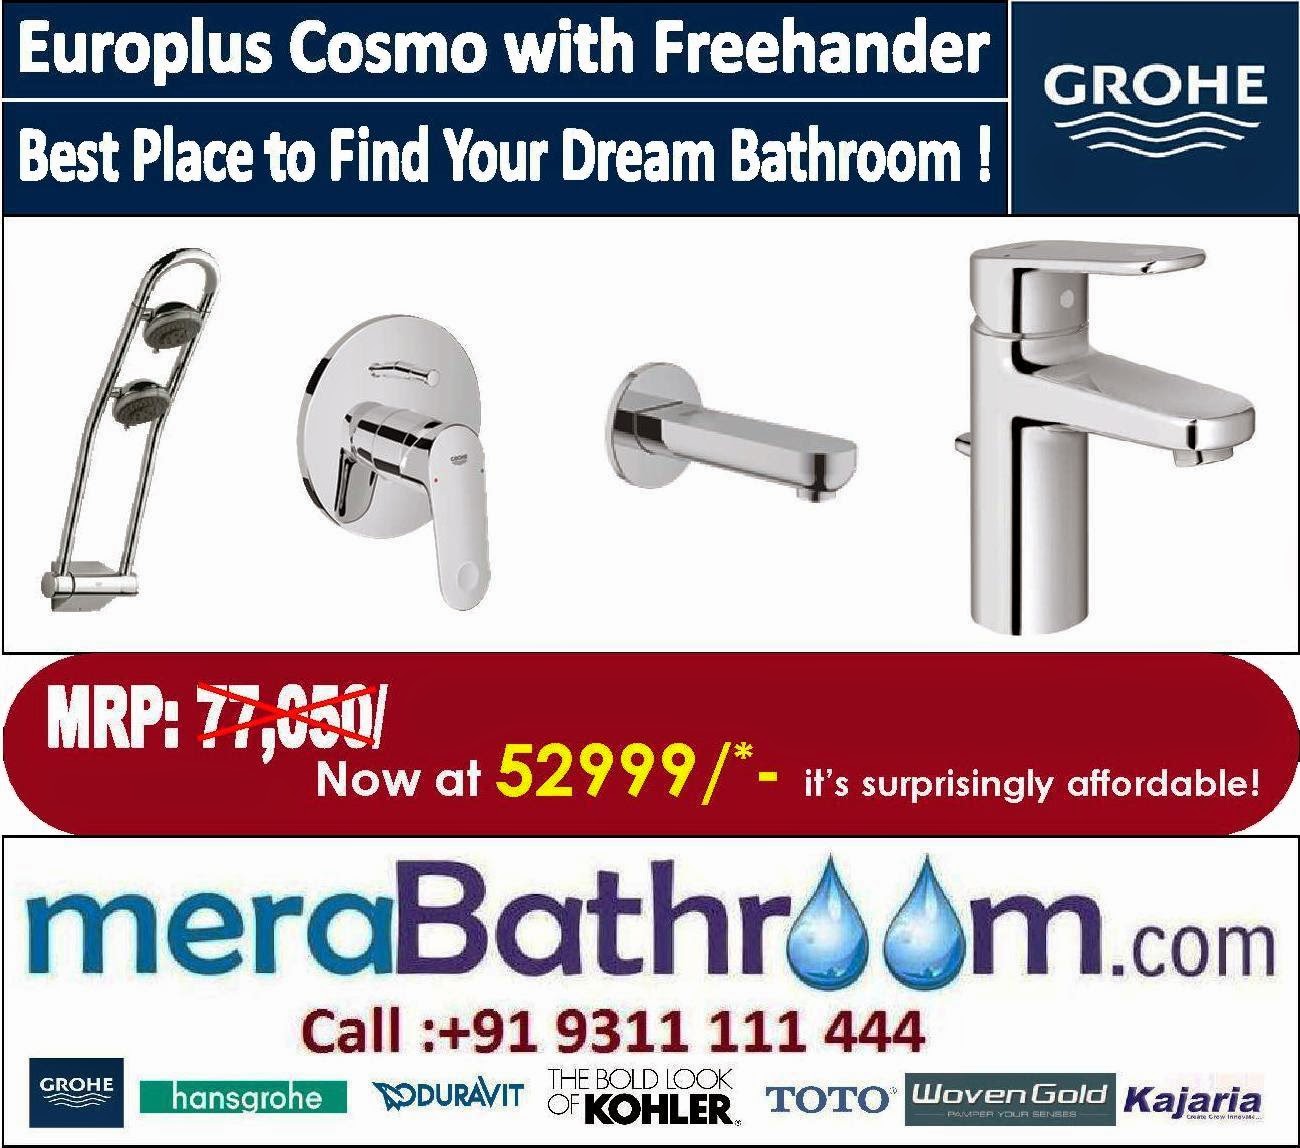  Grohe Europlus Cosmo with Freehander